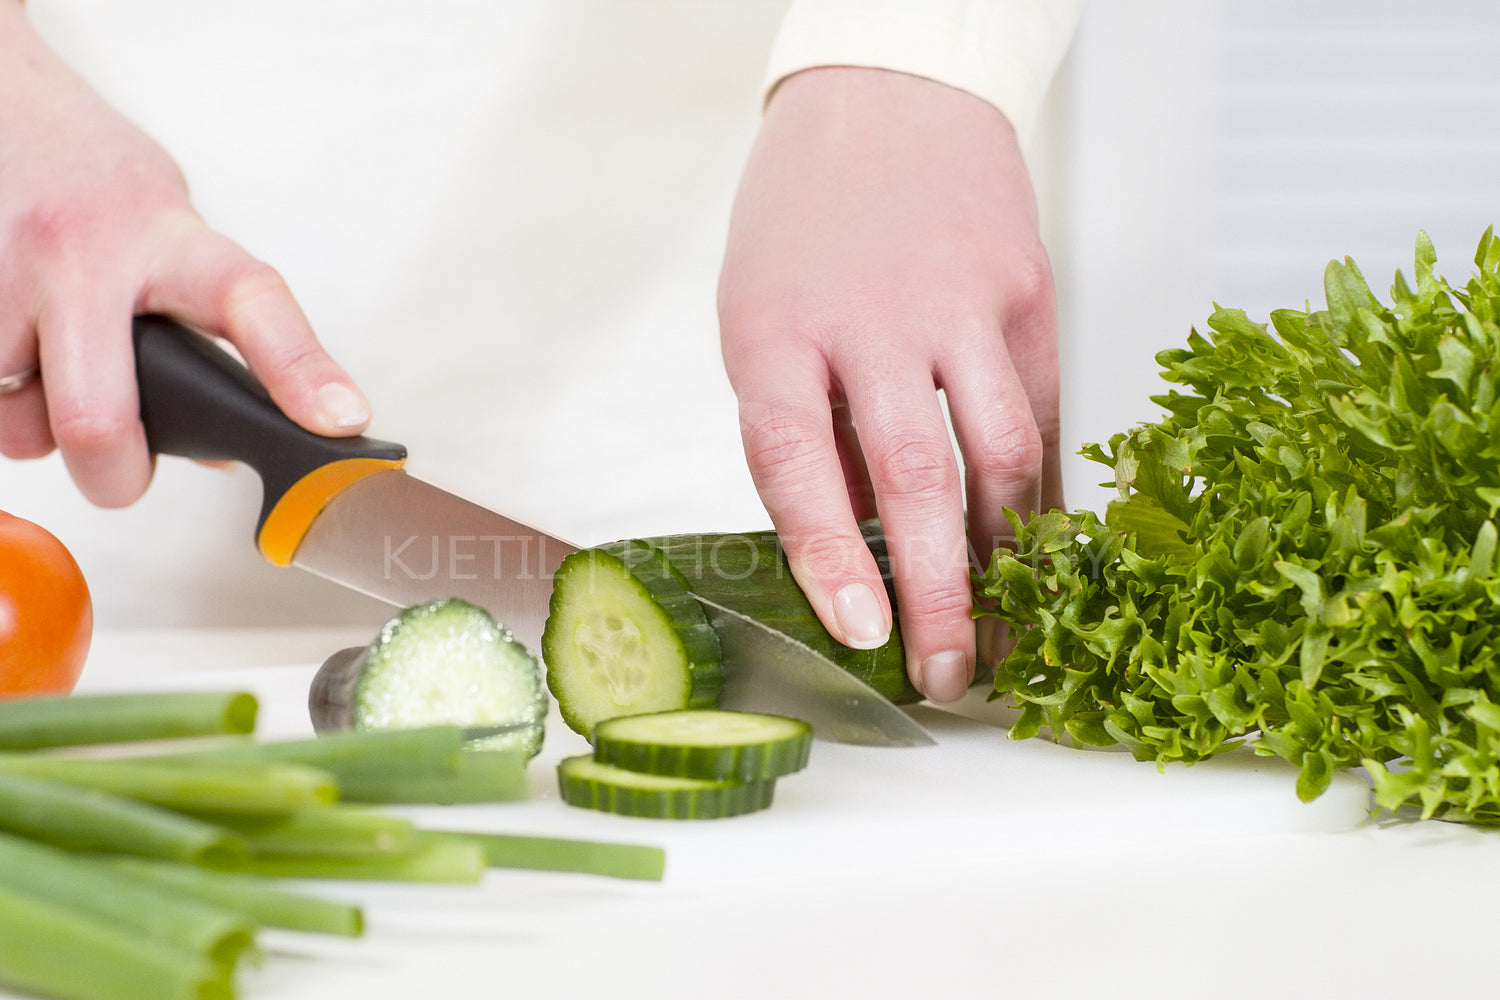 Chopping Vegetable to a Healthy Salad